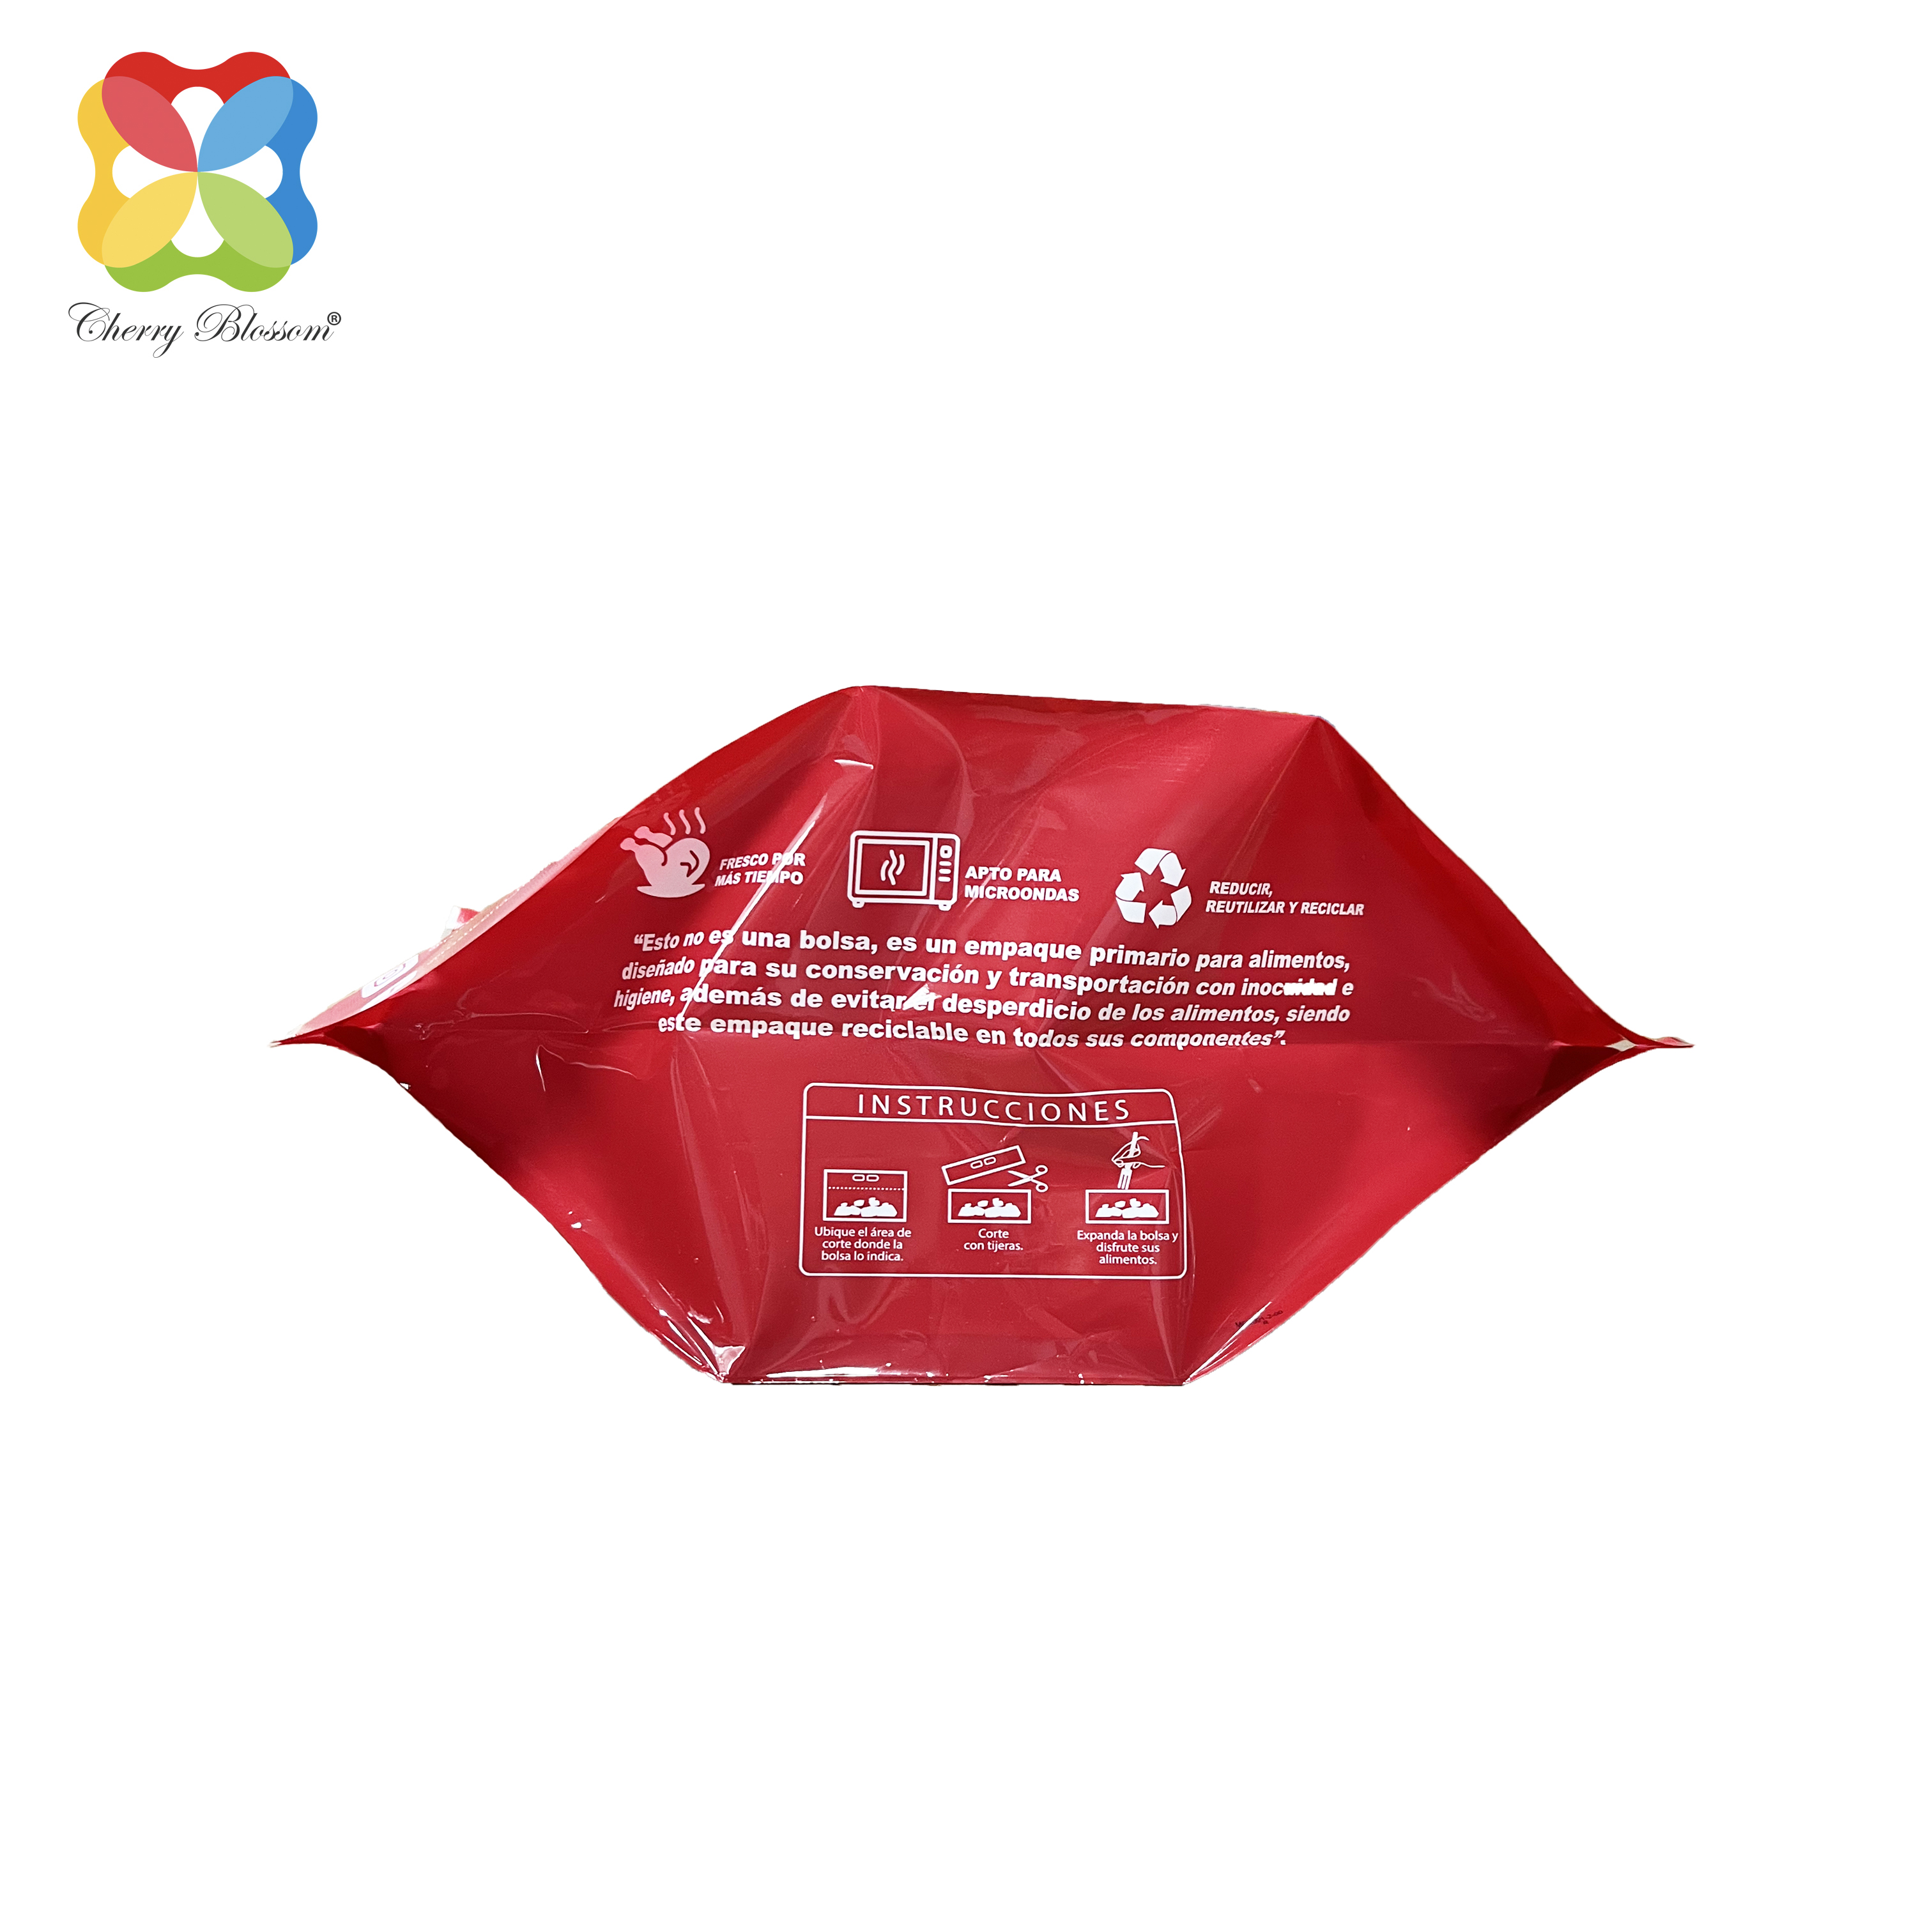 Turkey bag
transparent stand up pouch with handle packaging bag
vegetable 
fruit bag